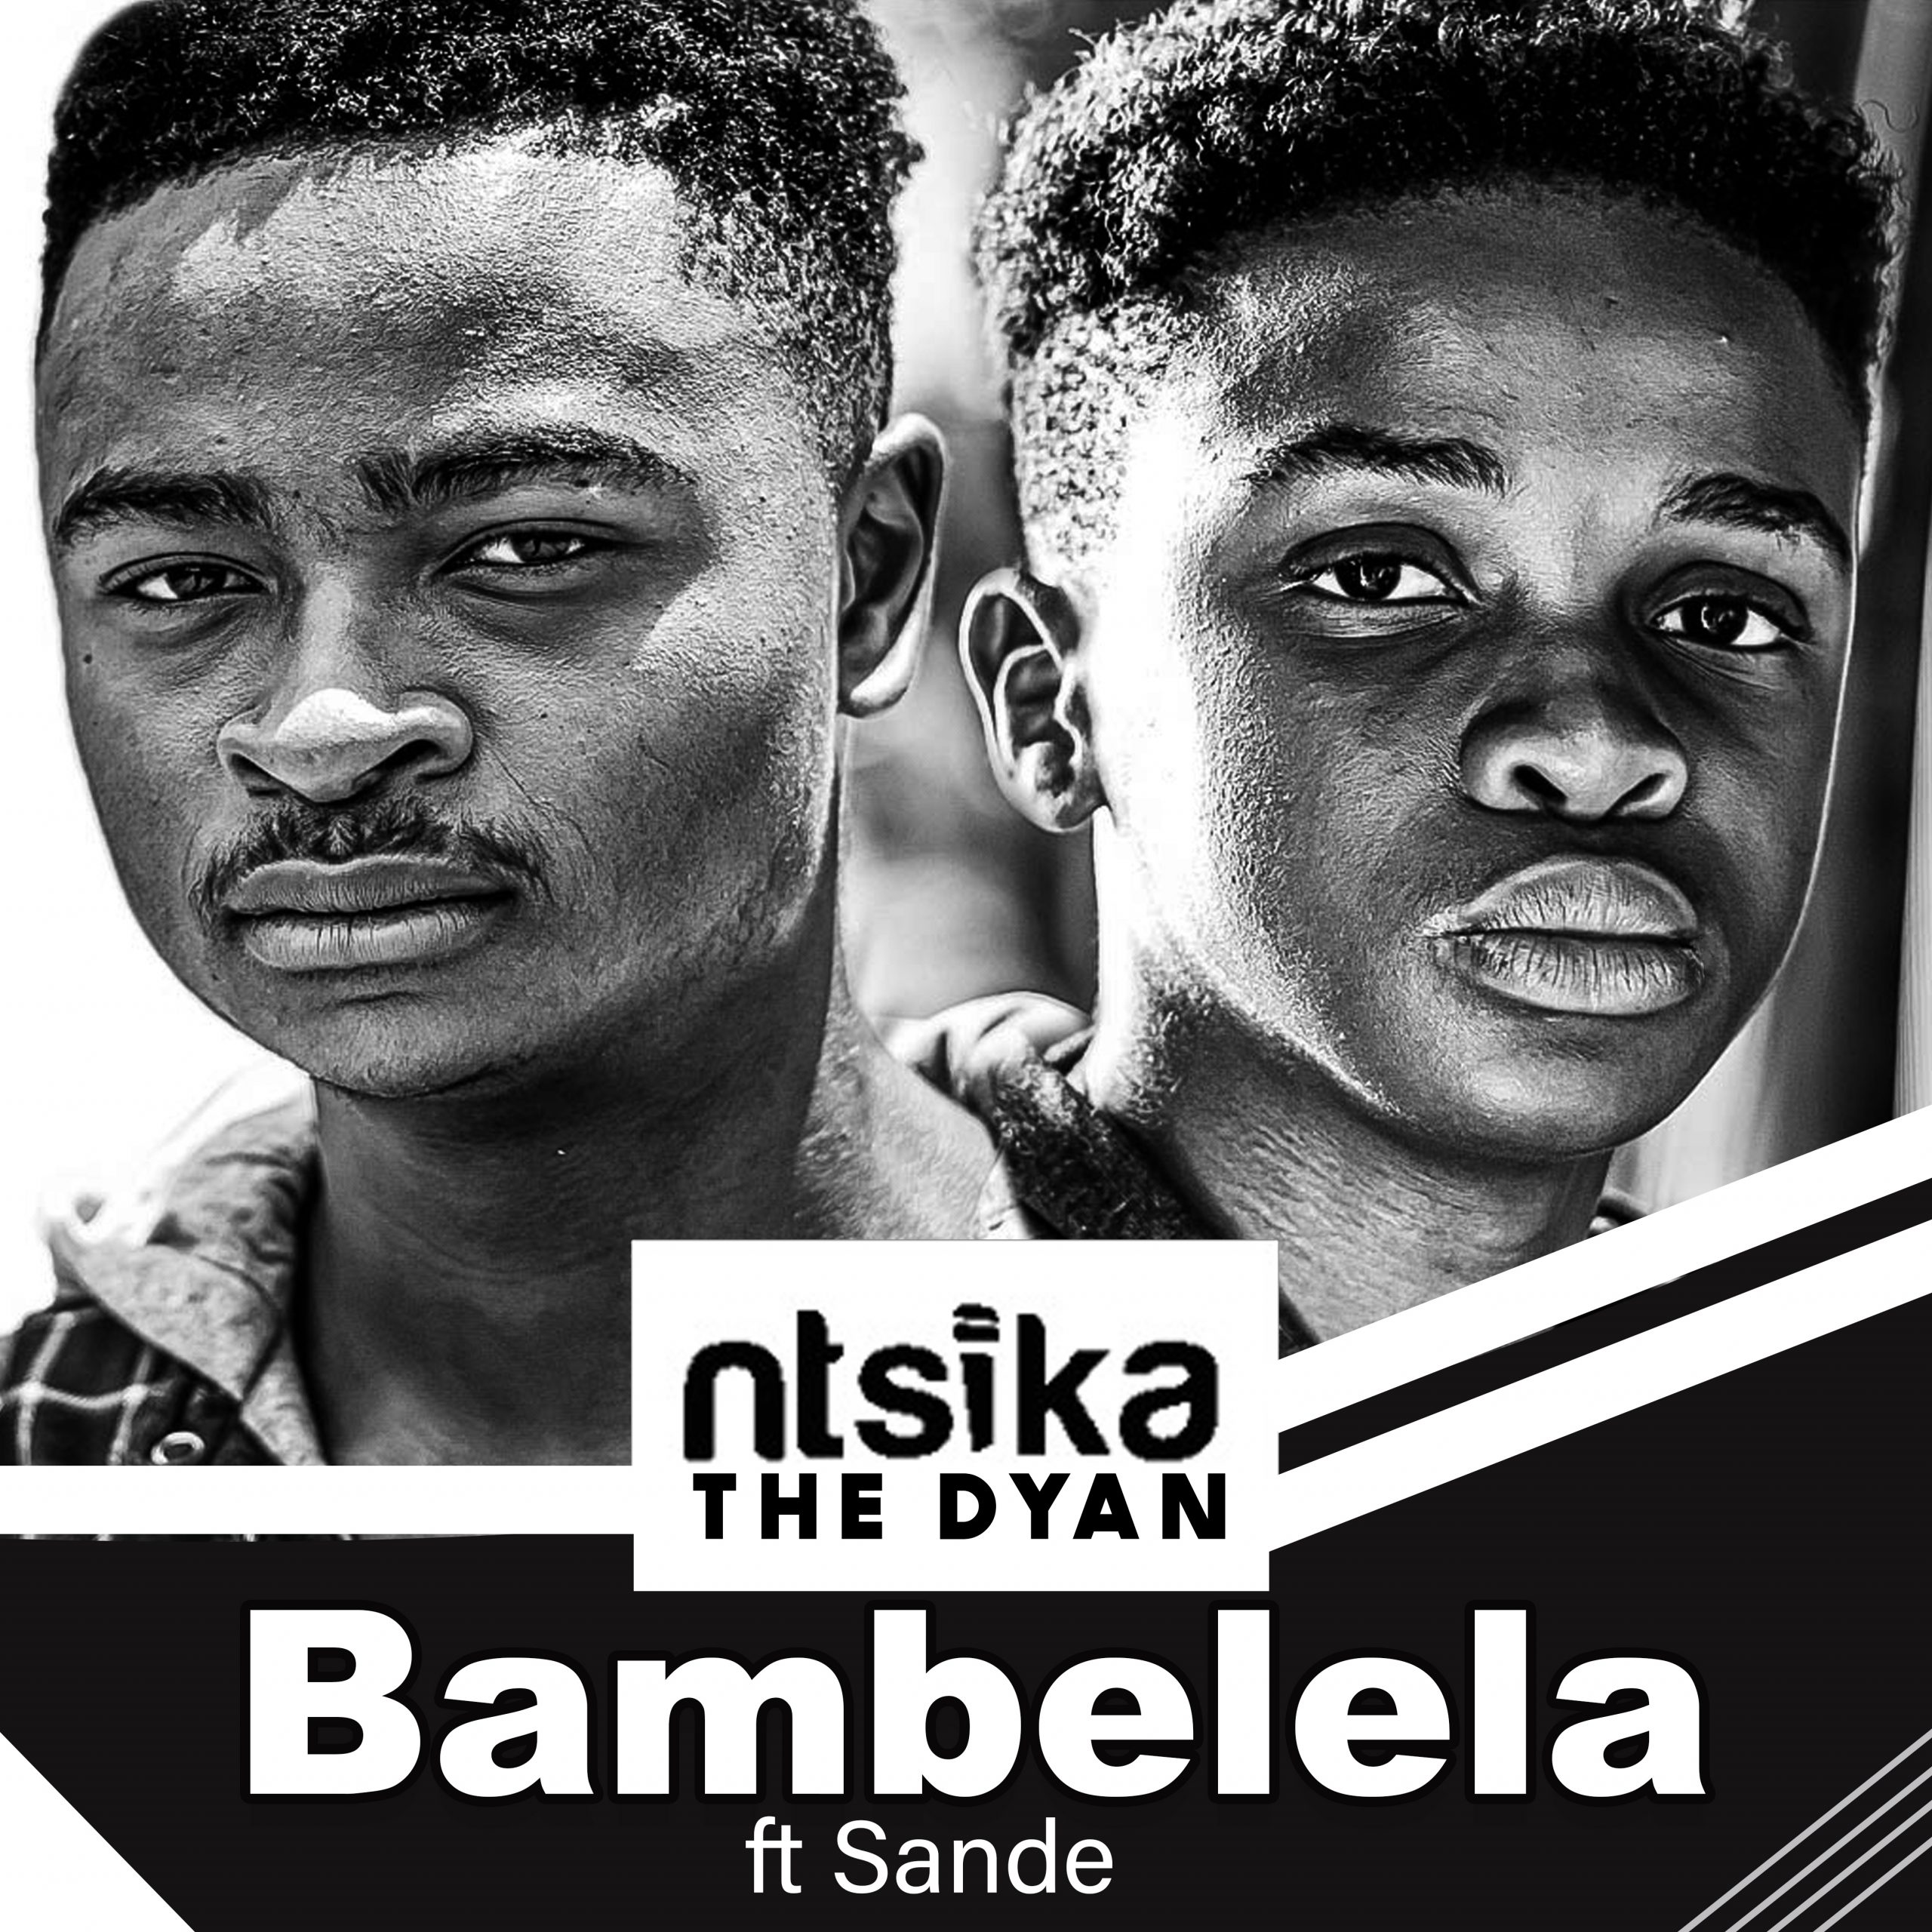 BAMBELELA is all about fighting against the odds and saying NO to giving up hope. Ntsika The Dyan is a force to be reckoned with. PLAYLISTED